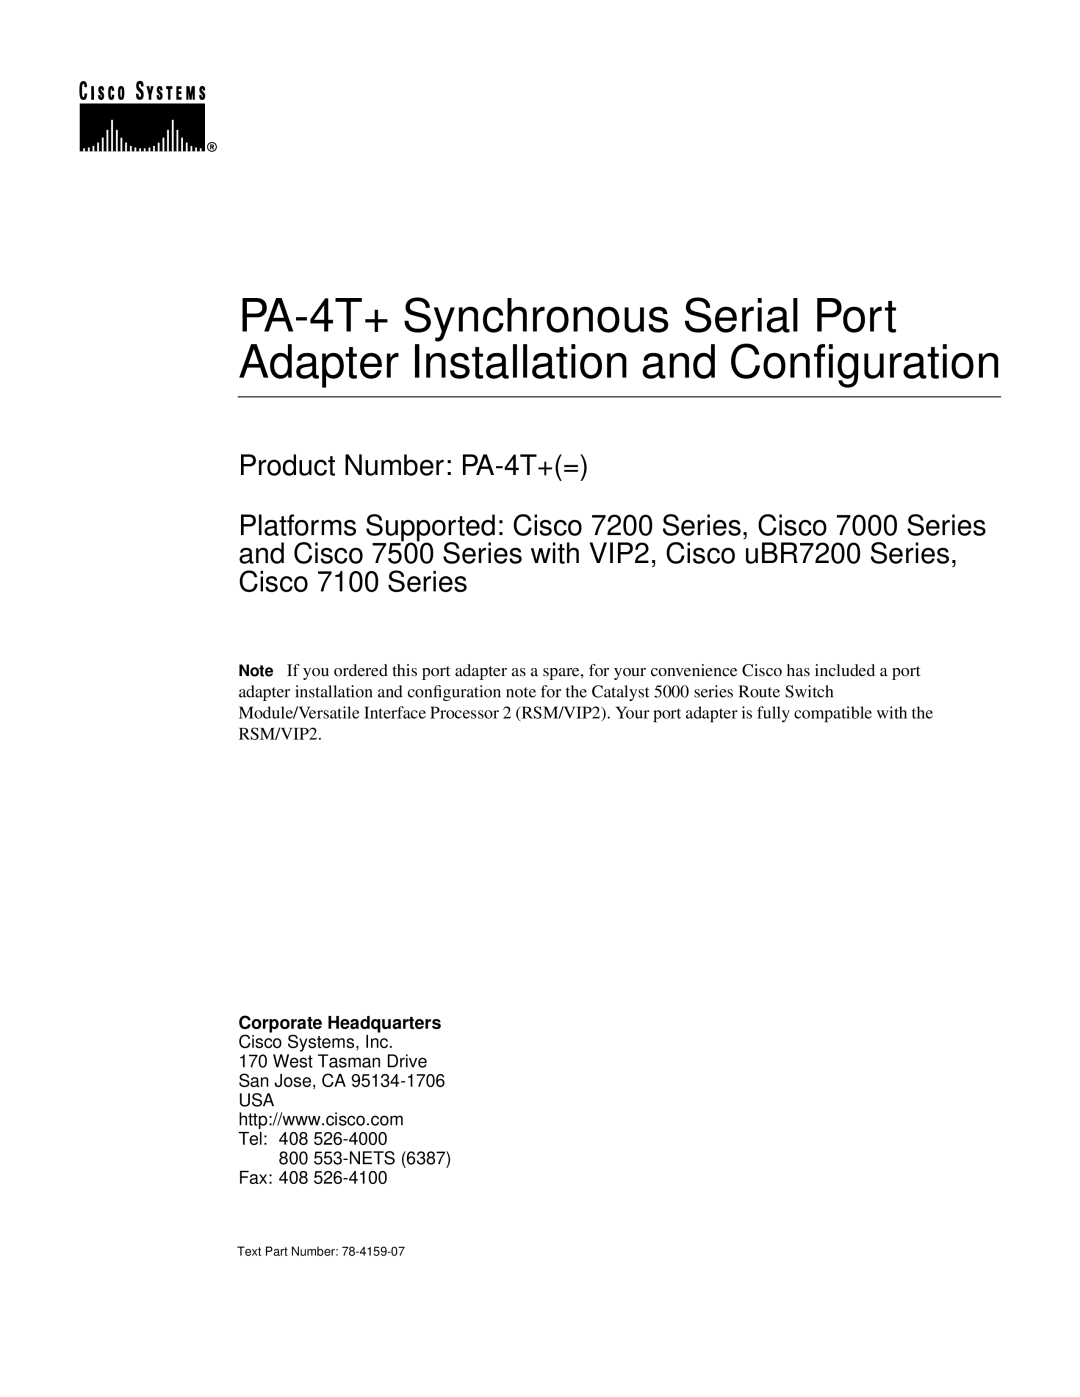 Cisco Systems manual PA-4T+ Synchronous Serial Port Adapter Installation and Configuration, Product Number PA-4T+= 